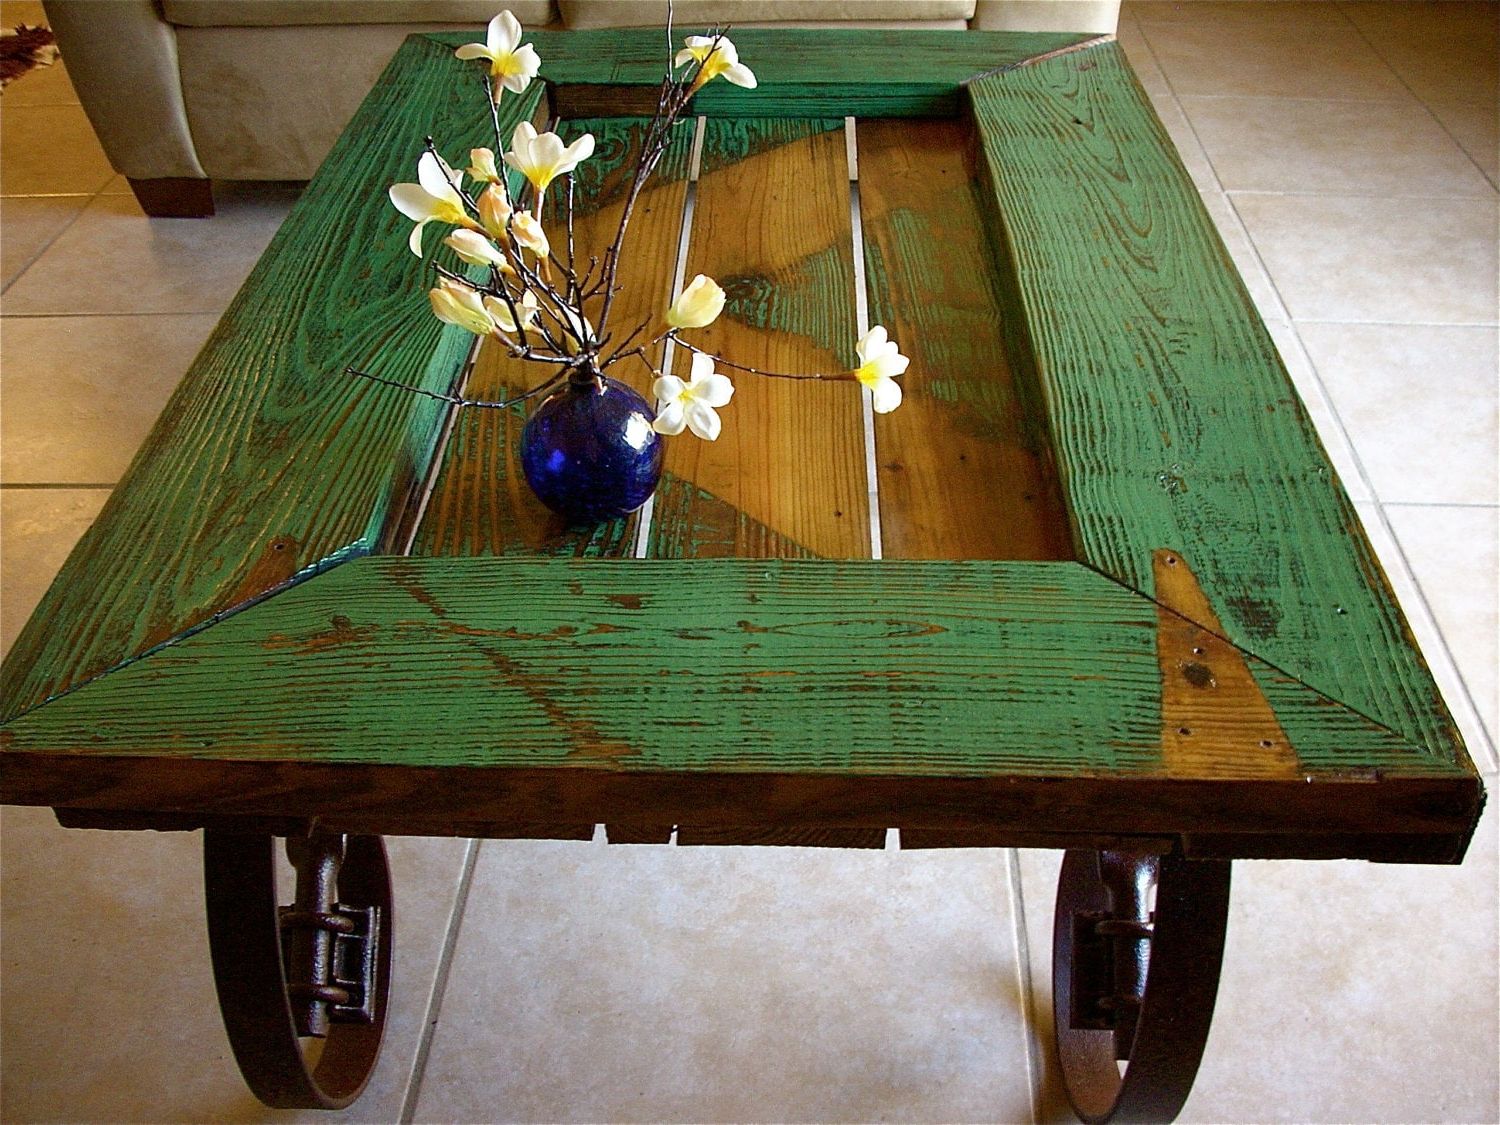 Most Recent Barn Door Coffee Table In Coffee Tables With Sliding Barn Doors (View 14 of 15)